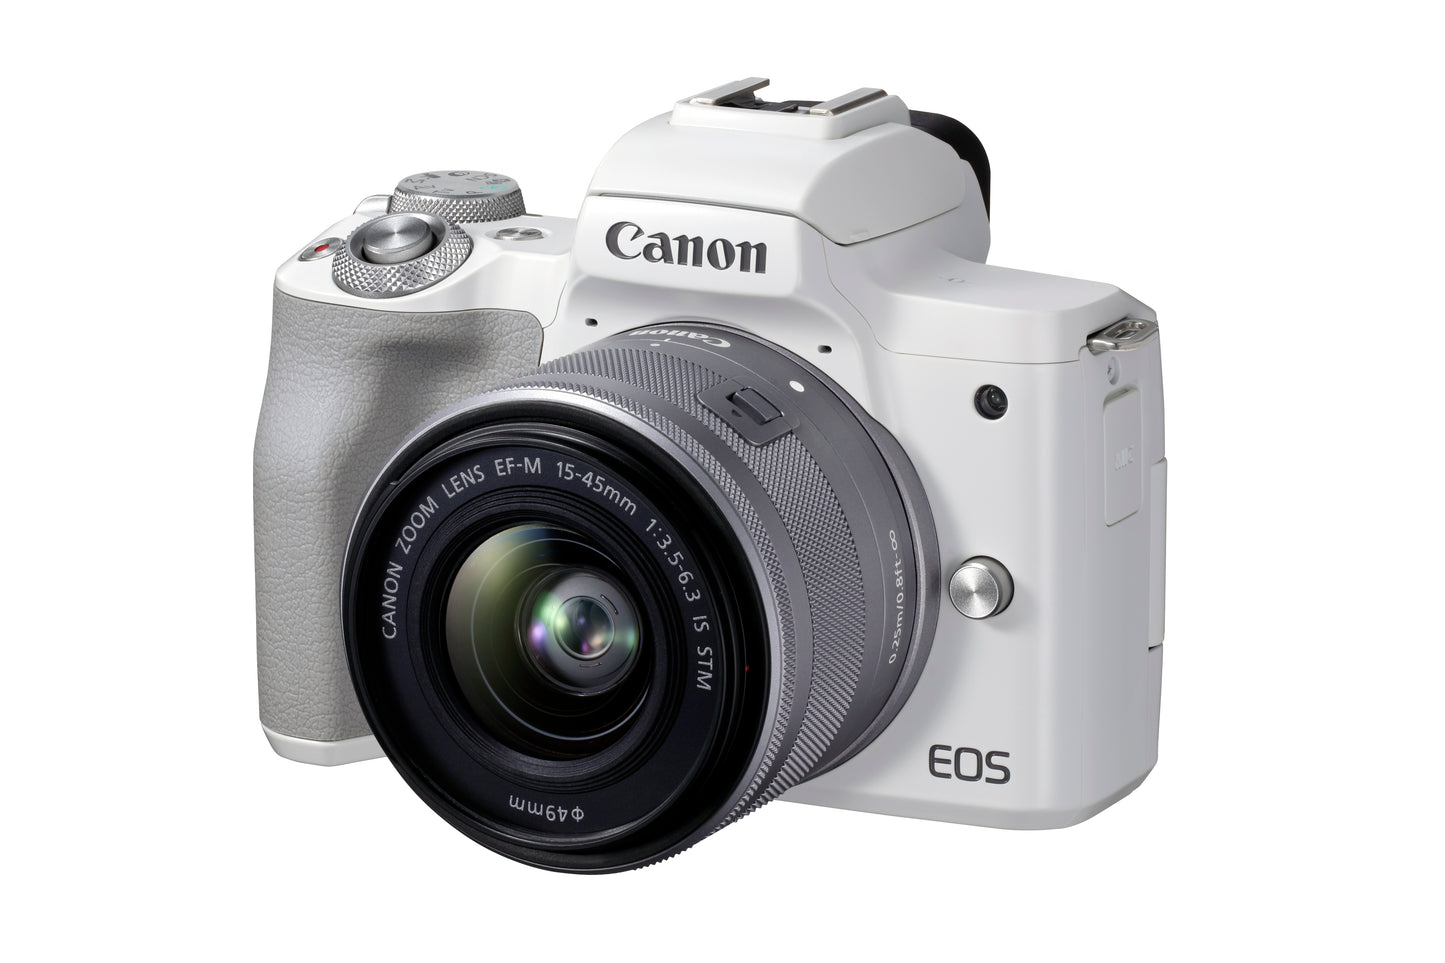 CANON EOS M50 Mark II Mirrorless Digital Camera with 15-45mm Lens (White)